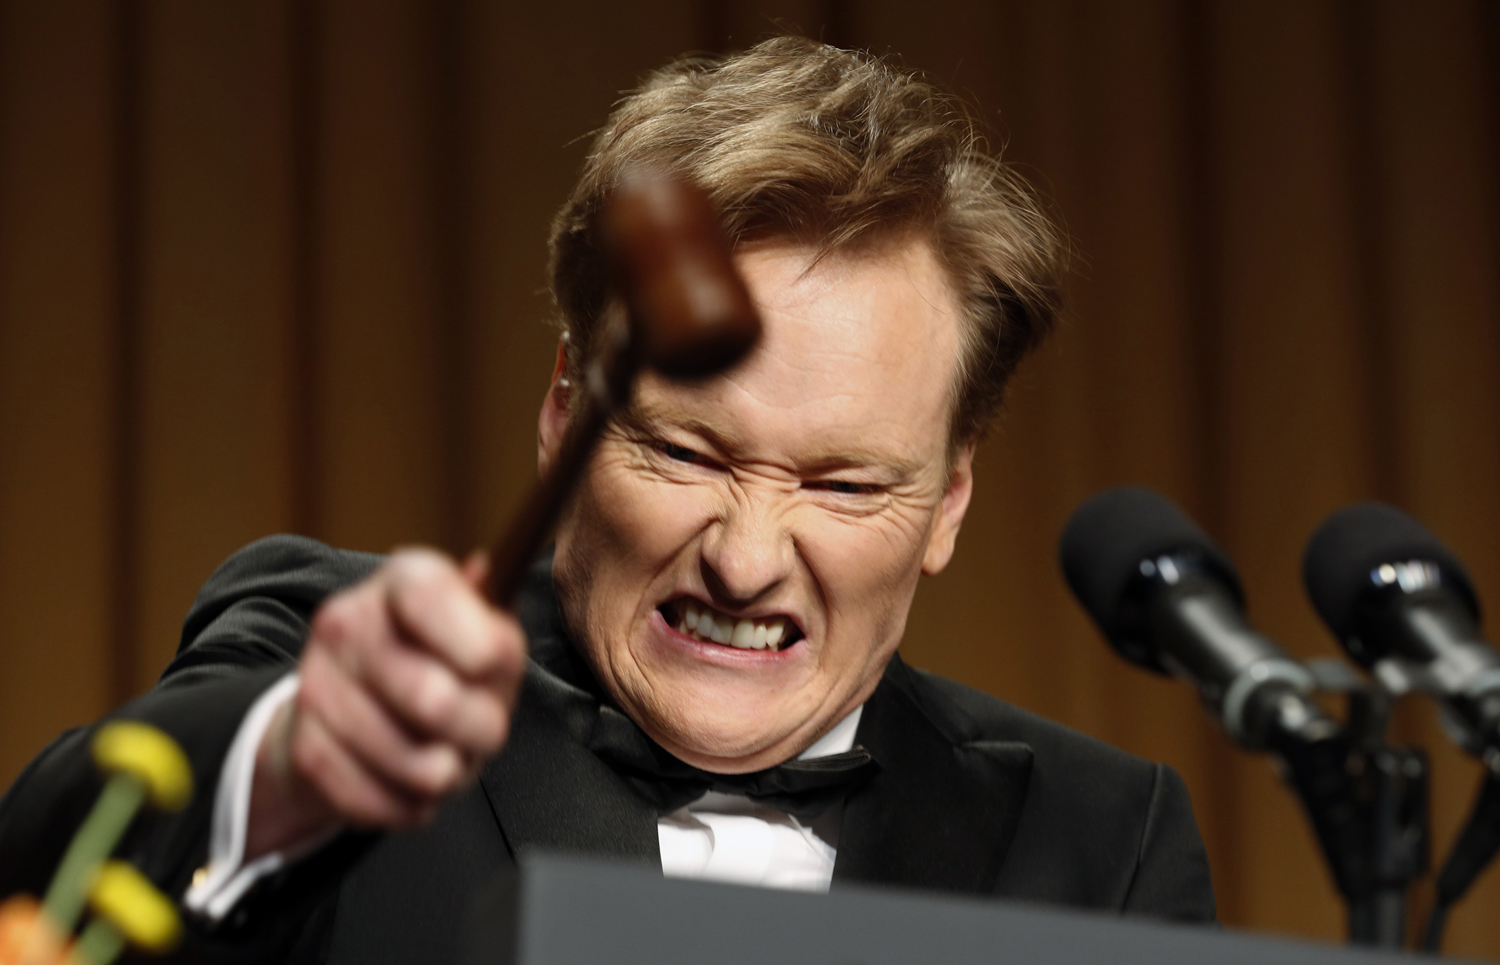 Comedian Conan O'Brien smashes a gavel as he speaks during the White House Correspondents Association Dinner in Washington April 27, 2013 (Kevin Lamarque / Reuters)